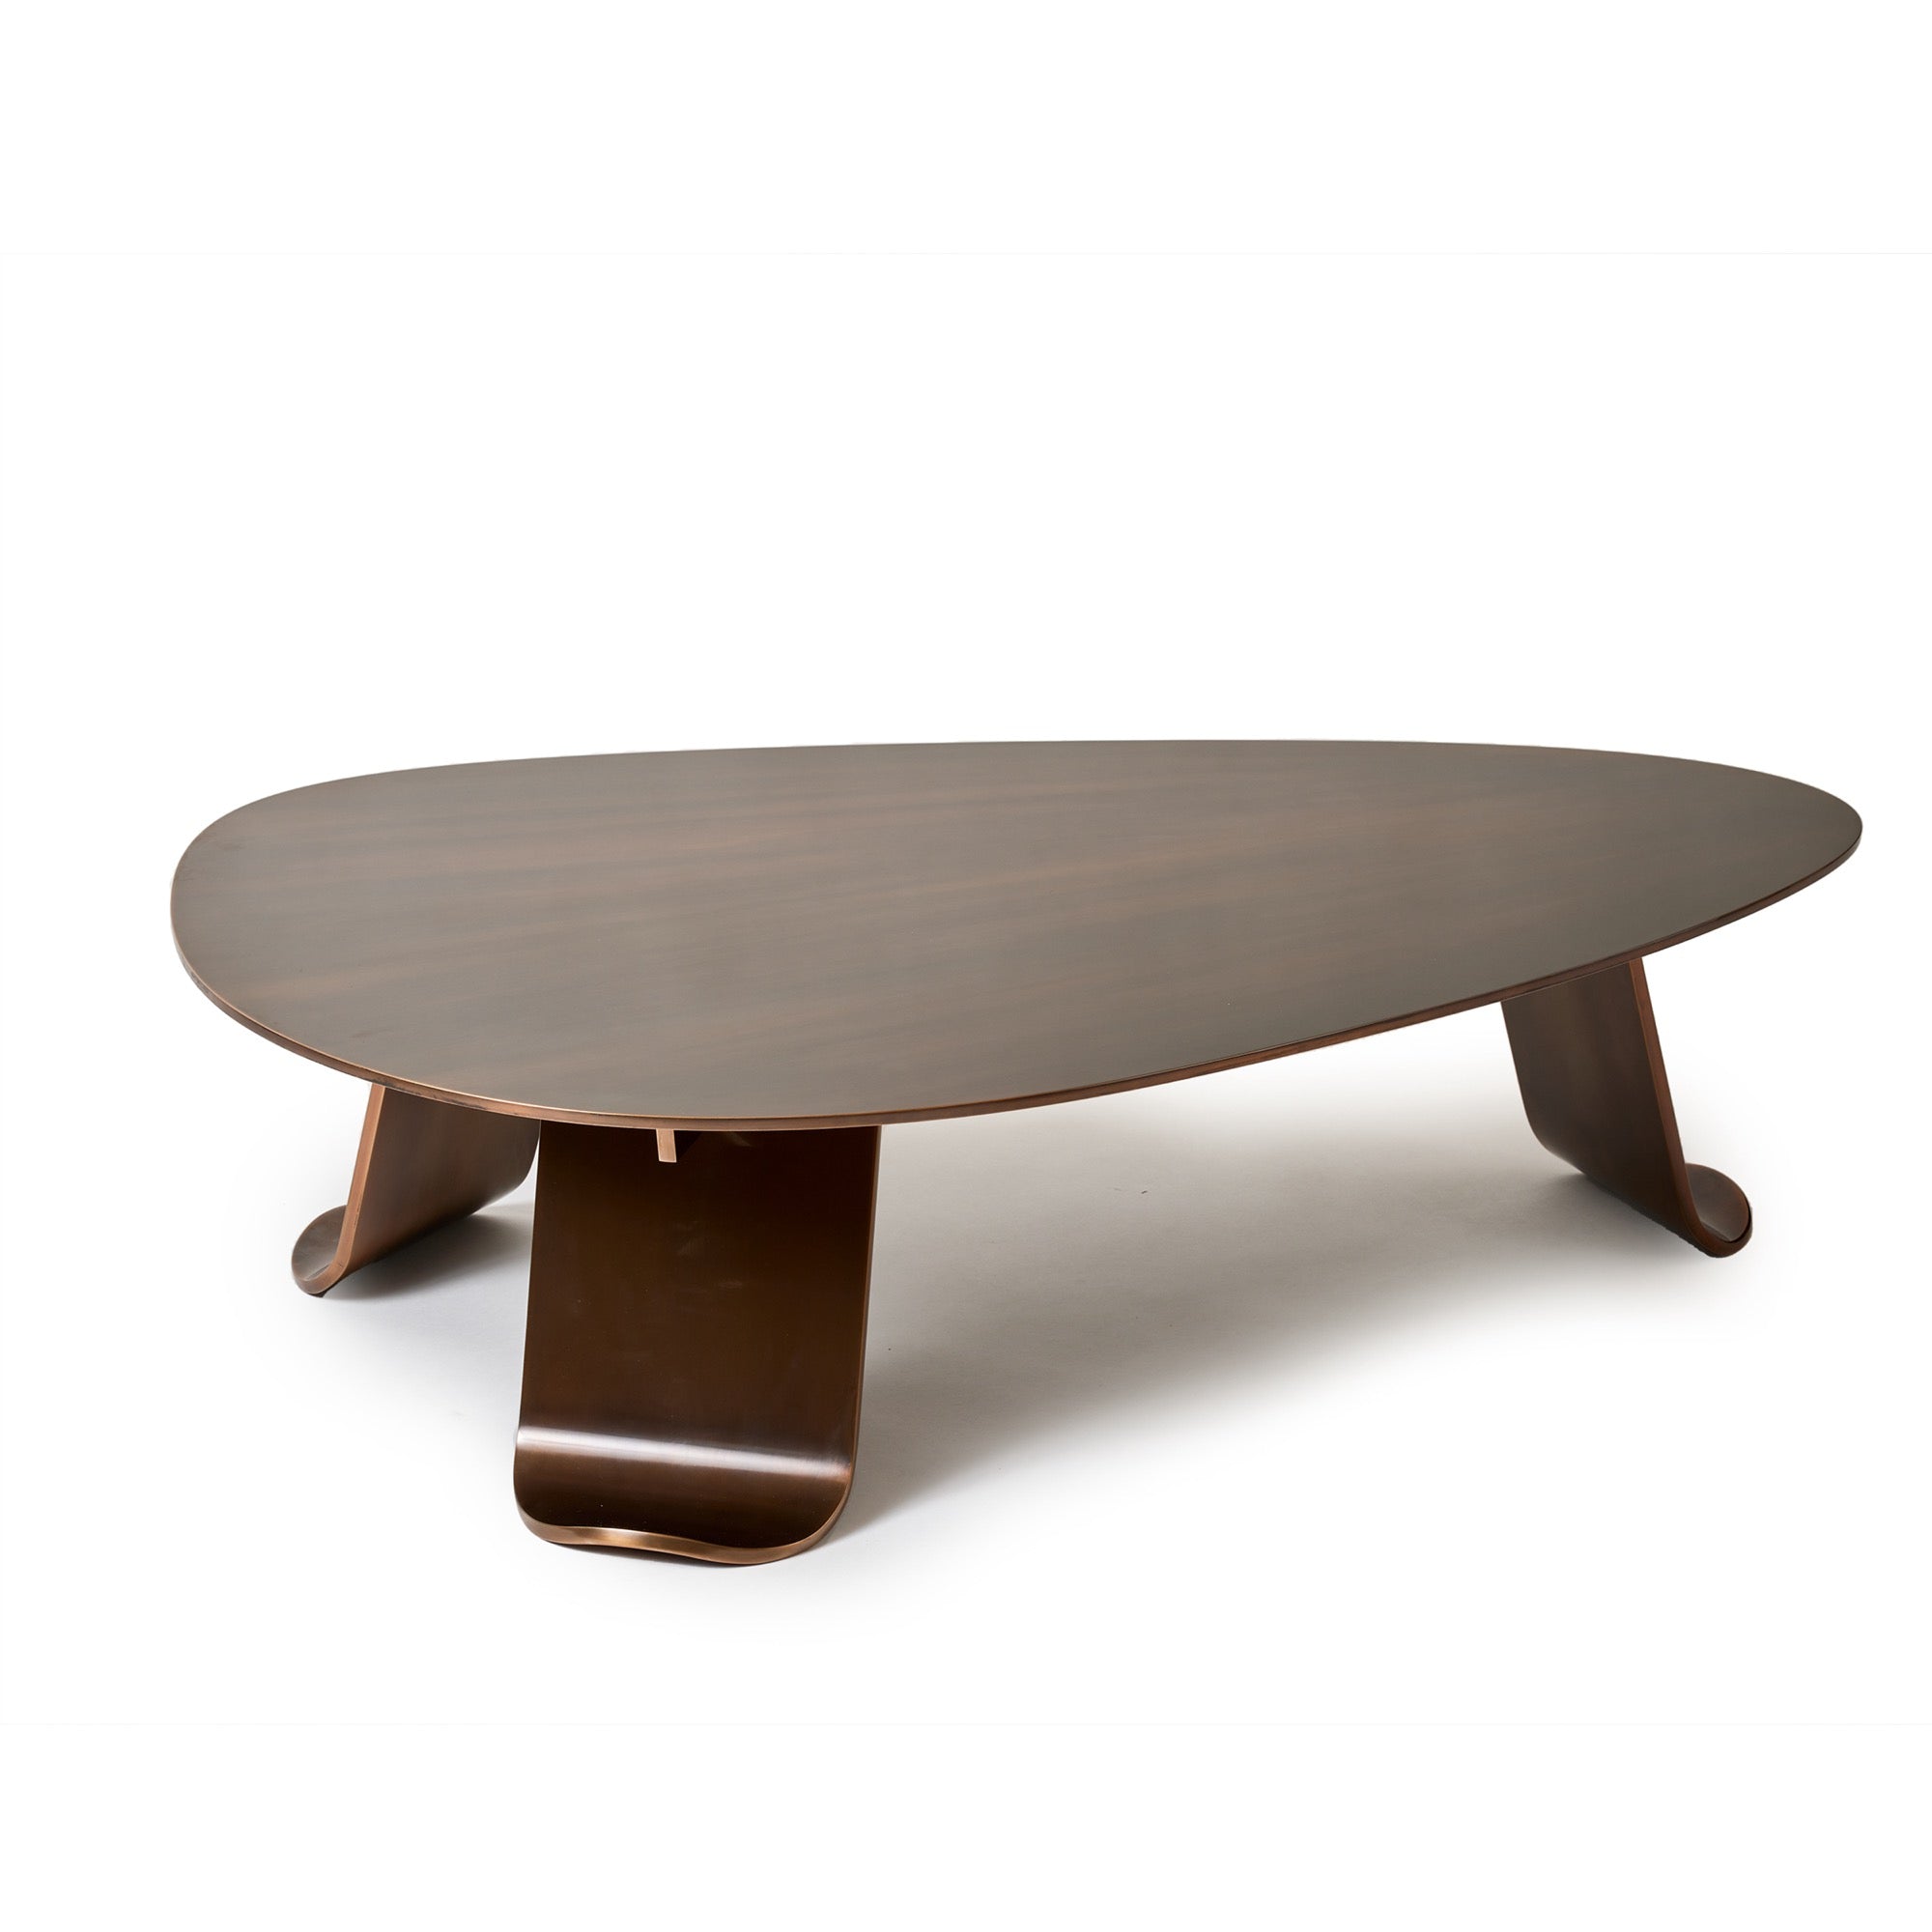 Chrysalis No. 3 Low Table in Polished Bronze by WYETH, Made to Order